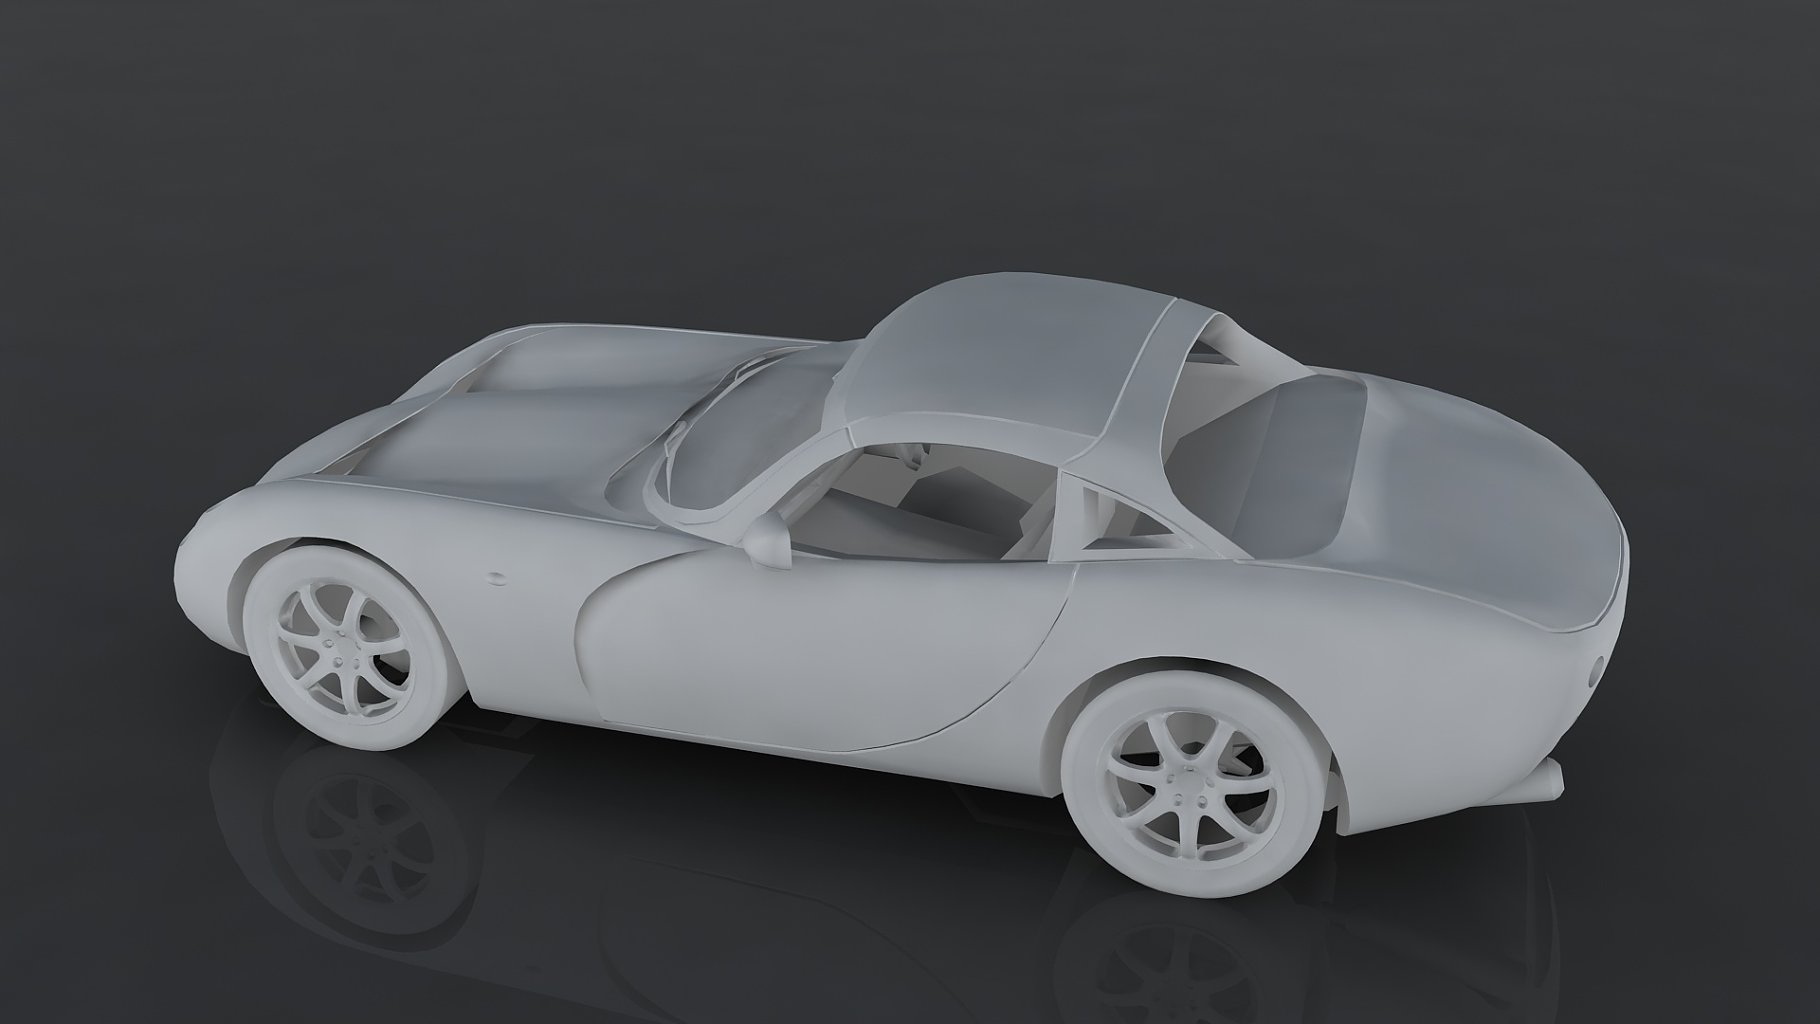 Gray mockup of 2001 tvr tuscan s from above.